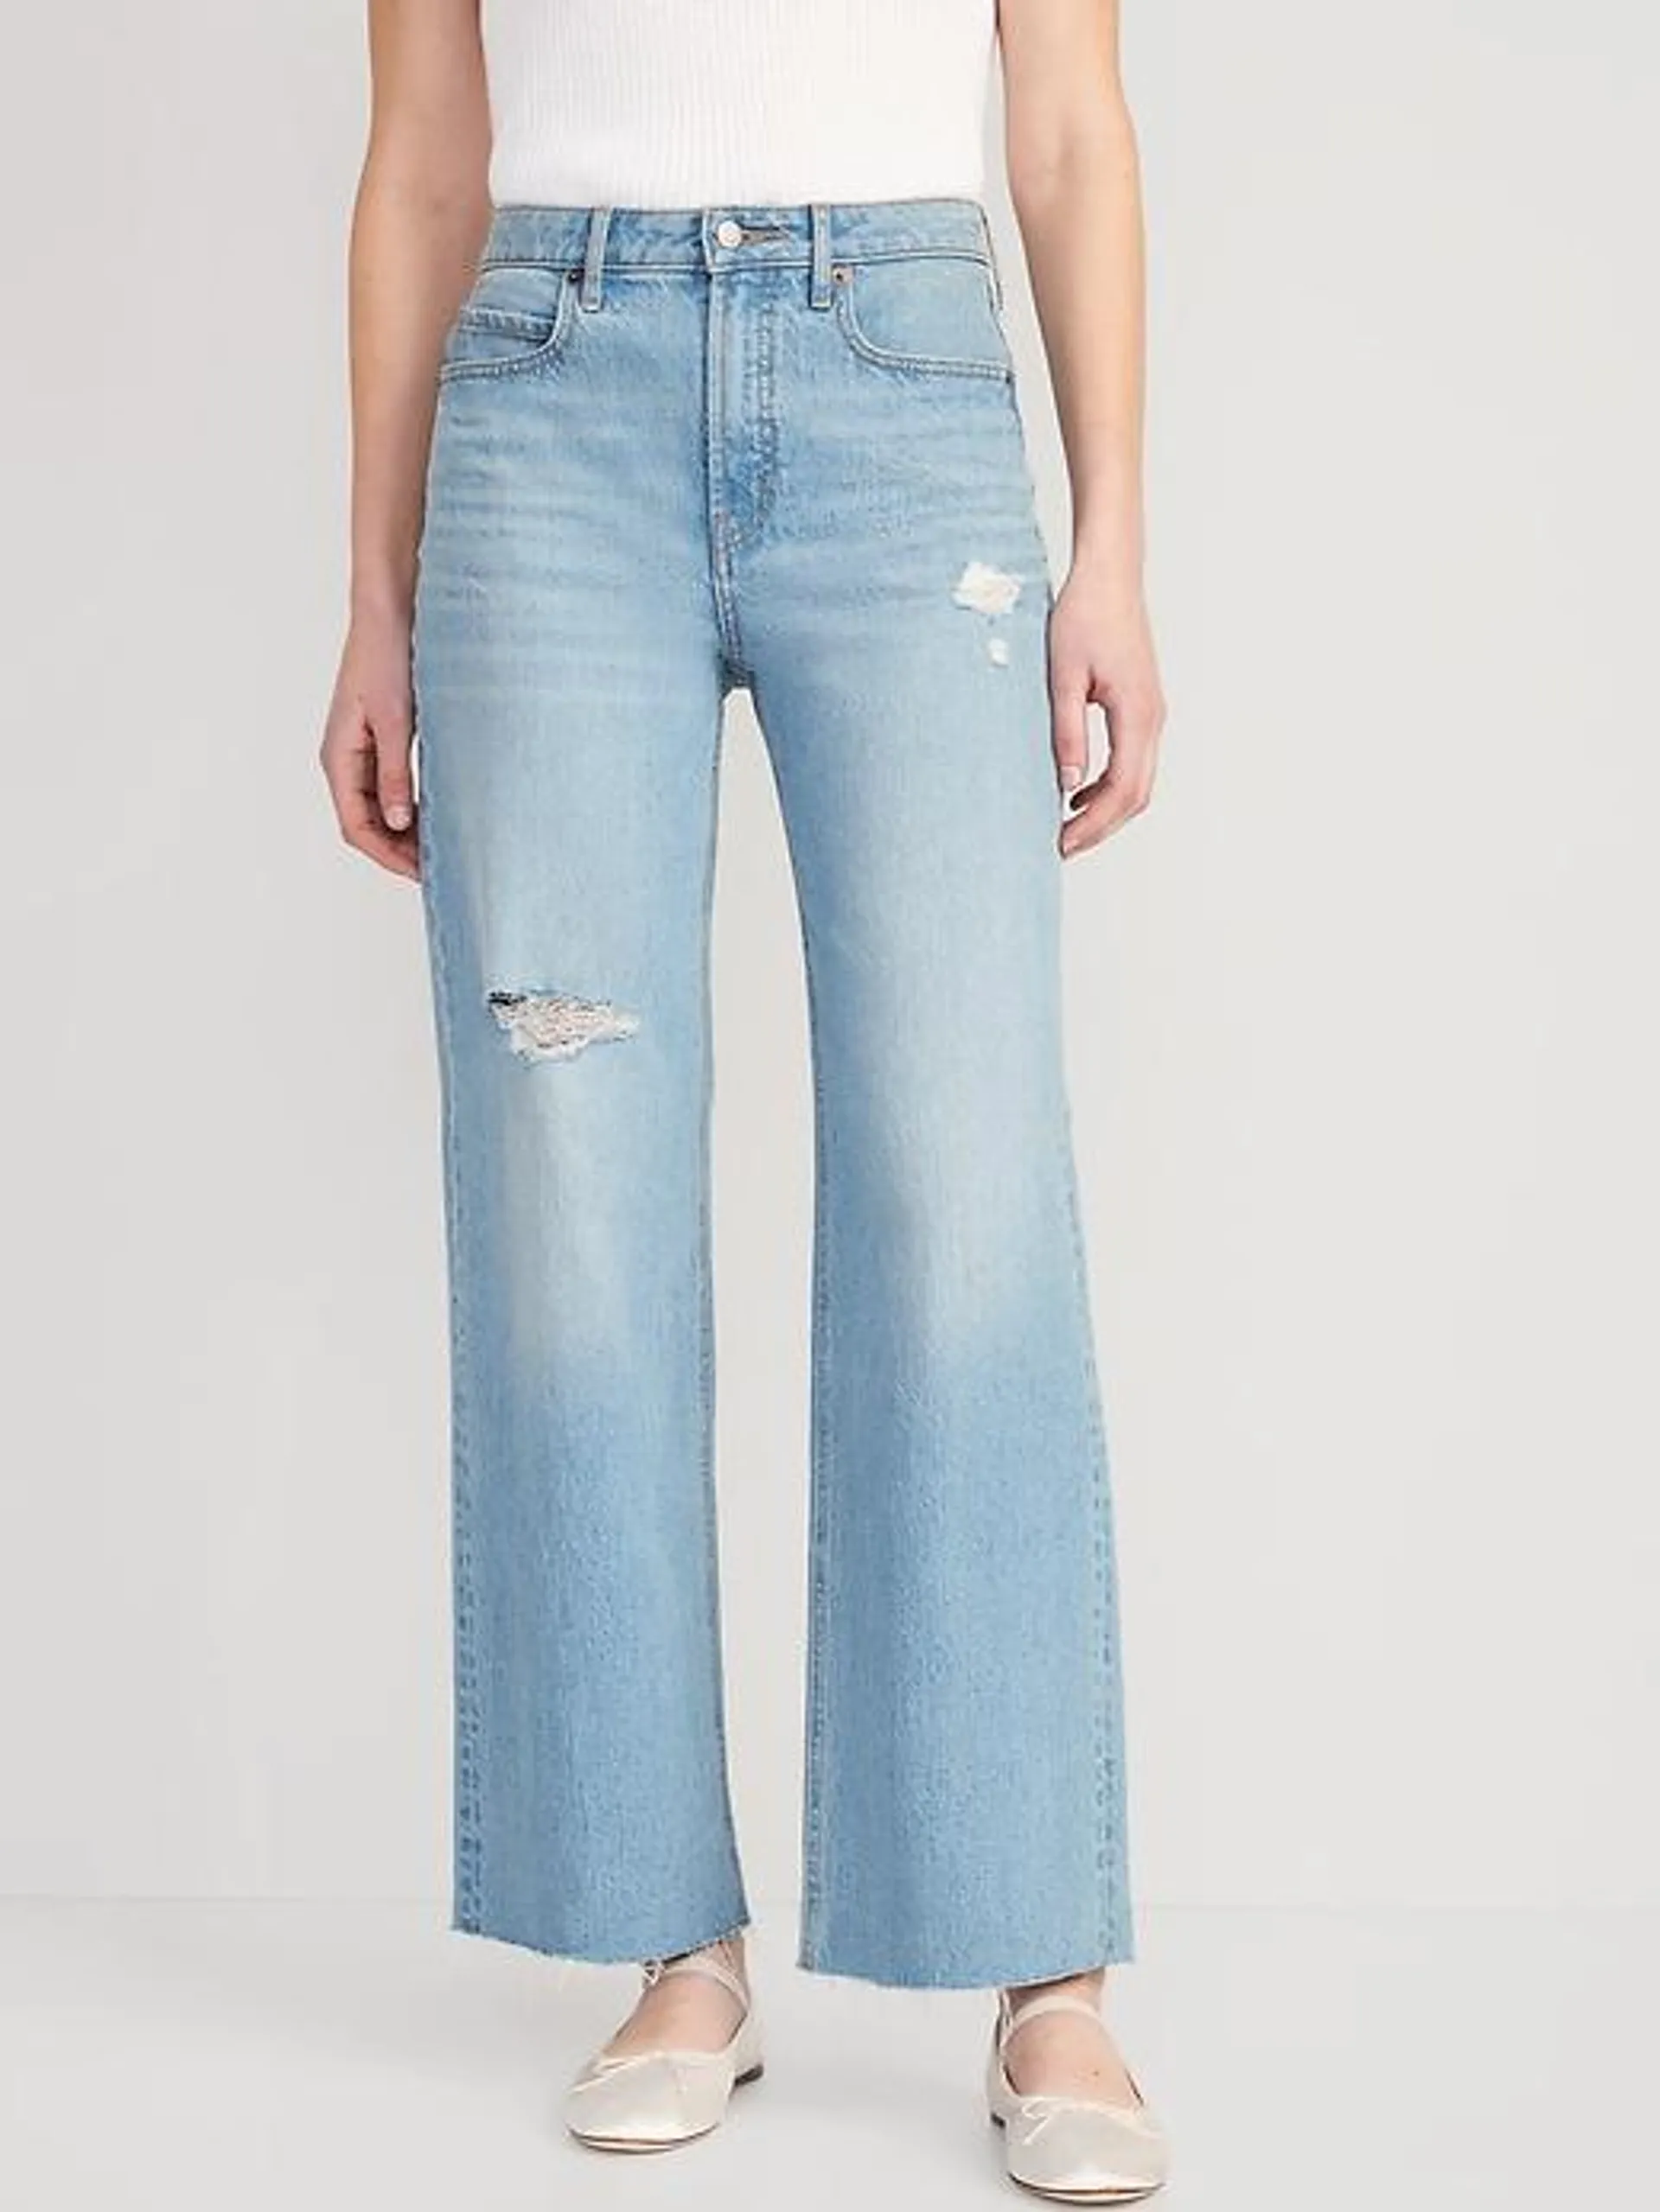 Extra High-Waisted Sky-Hi Ripped Cut-Off Wide-Leg Jeans for Women